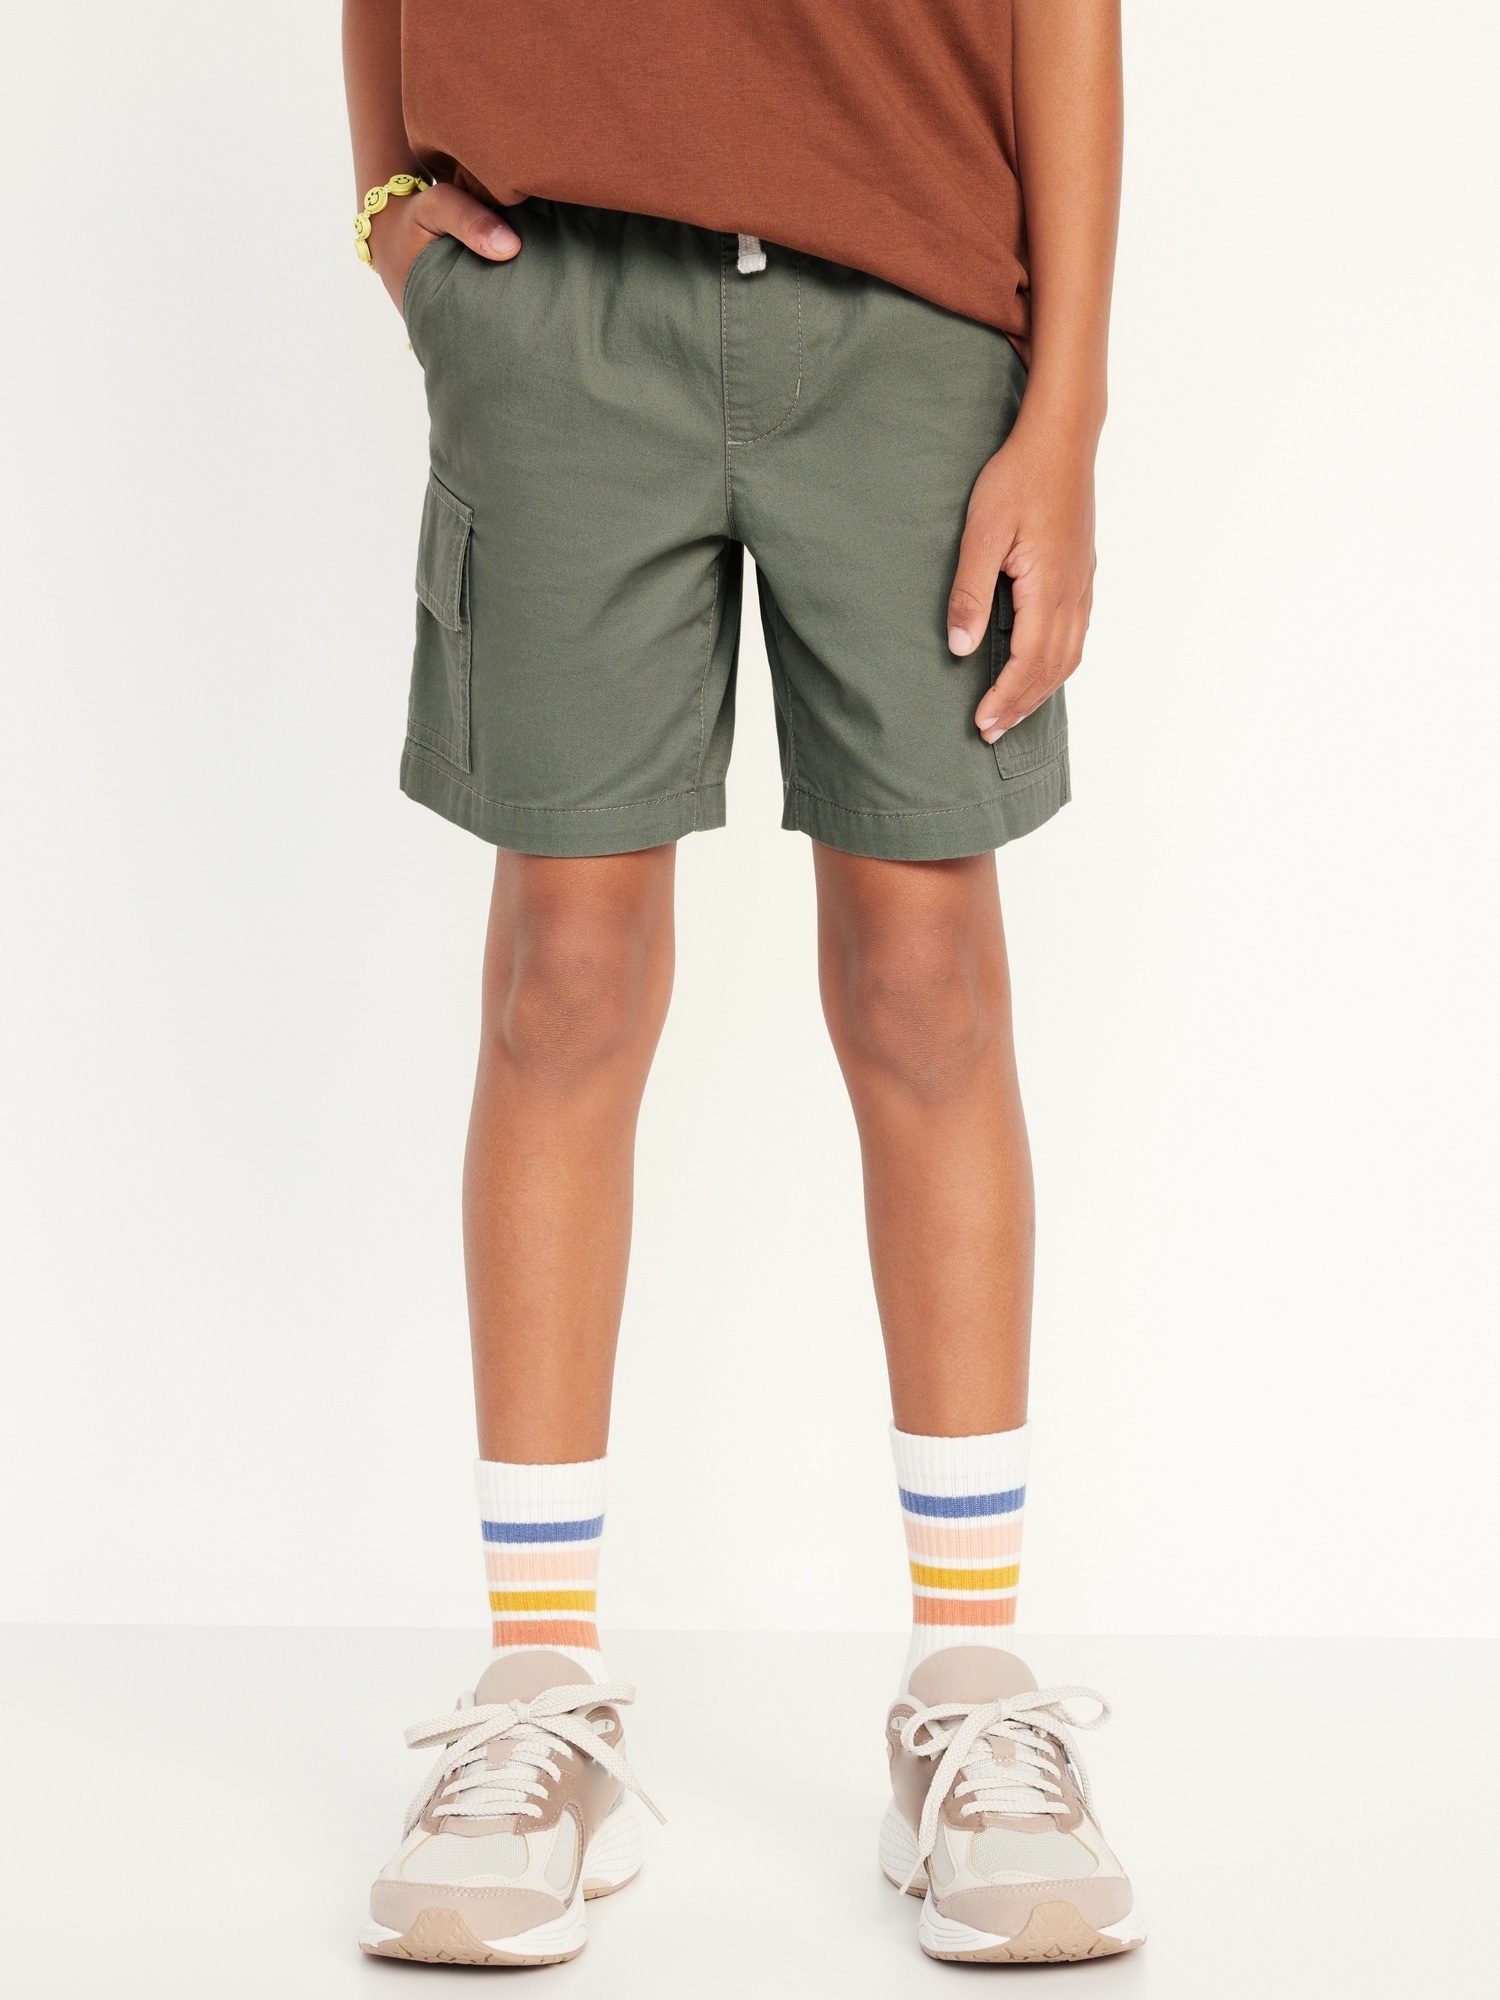 Cargo Jogger Shorts for Boys (Above Knee) Hot Deal